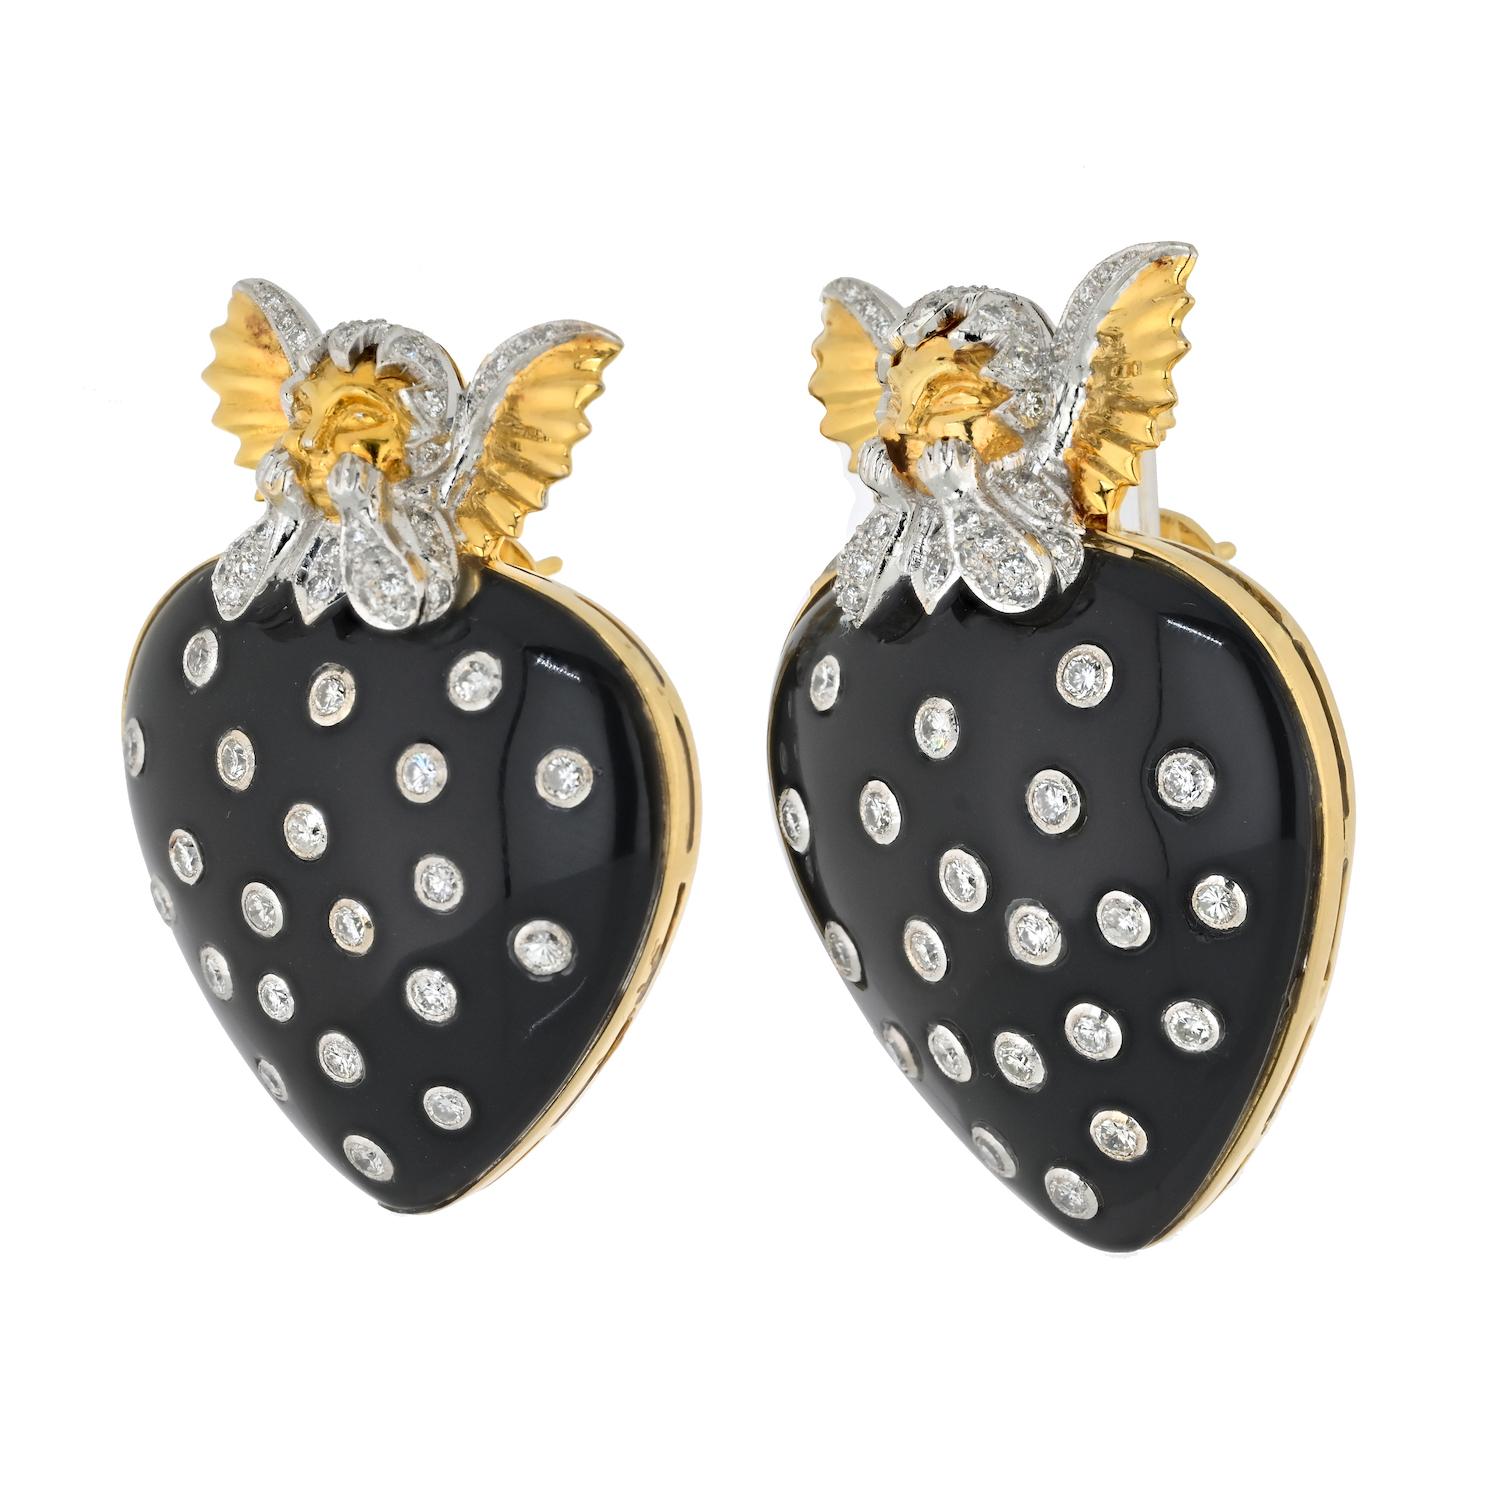 Indulge in a touch of whimsical elegance with these estate earrings by David Webb. Crafted in the form of striking black enameled hearts, these exquisite pieces are adorned with shimmering round diamonds that add a touch of sparkle and allure.